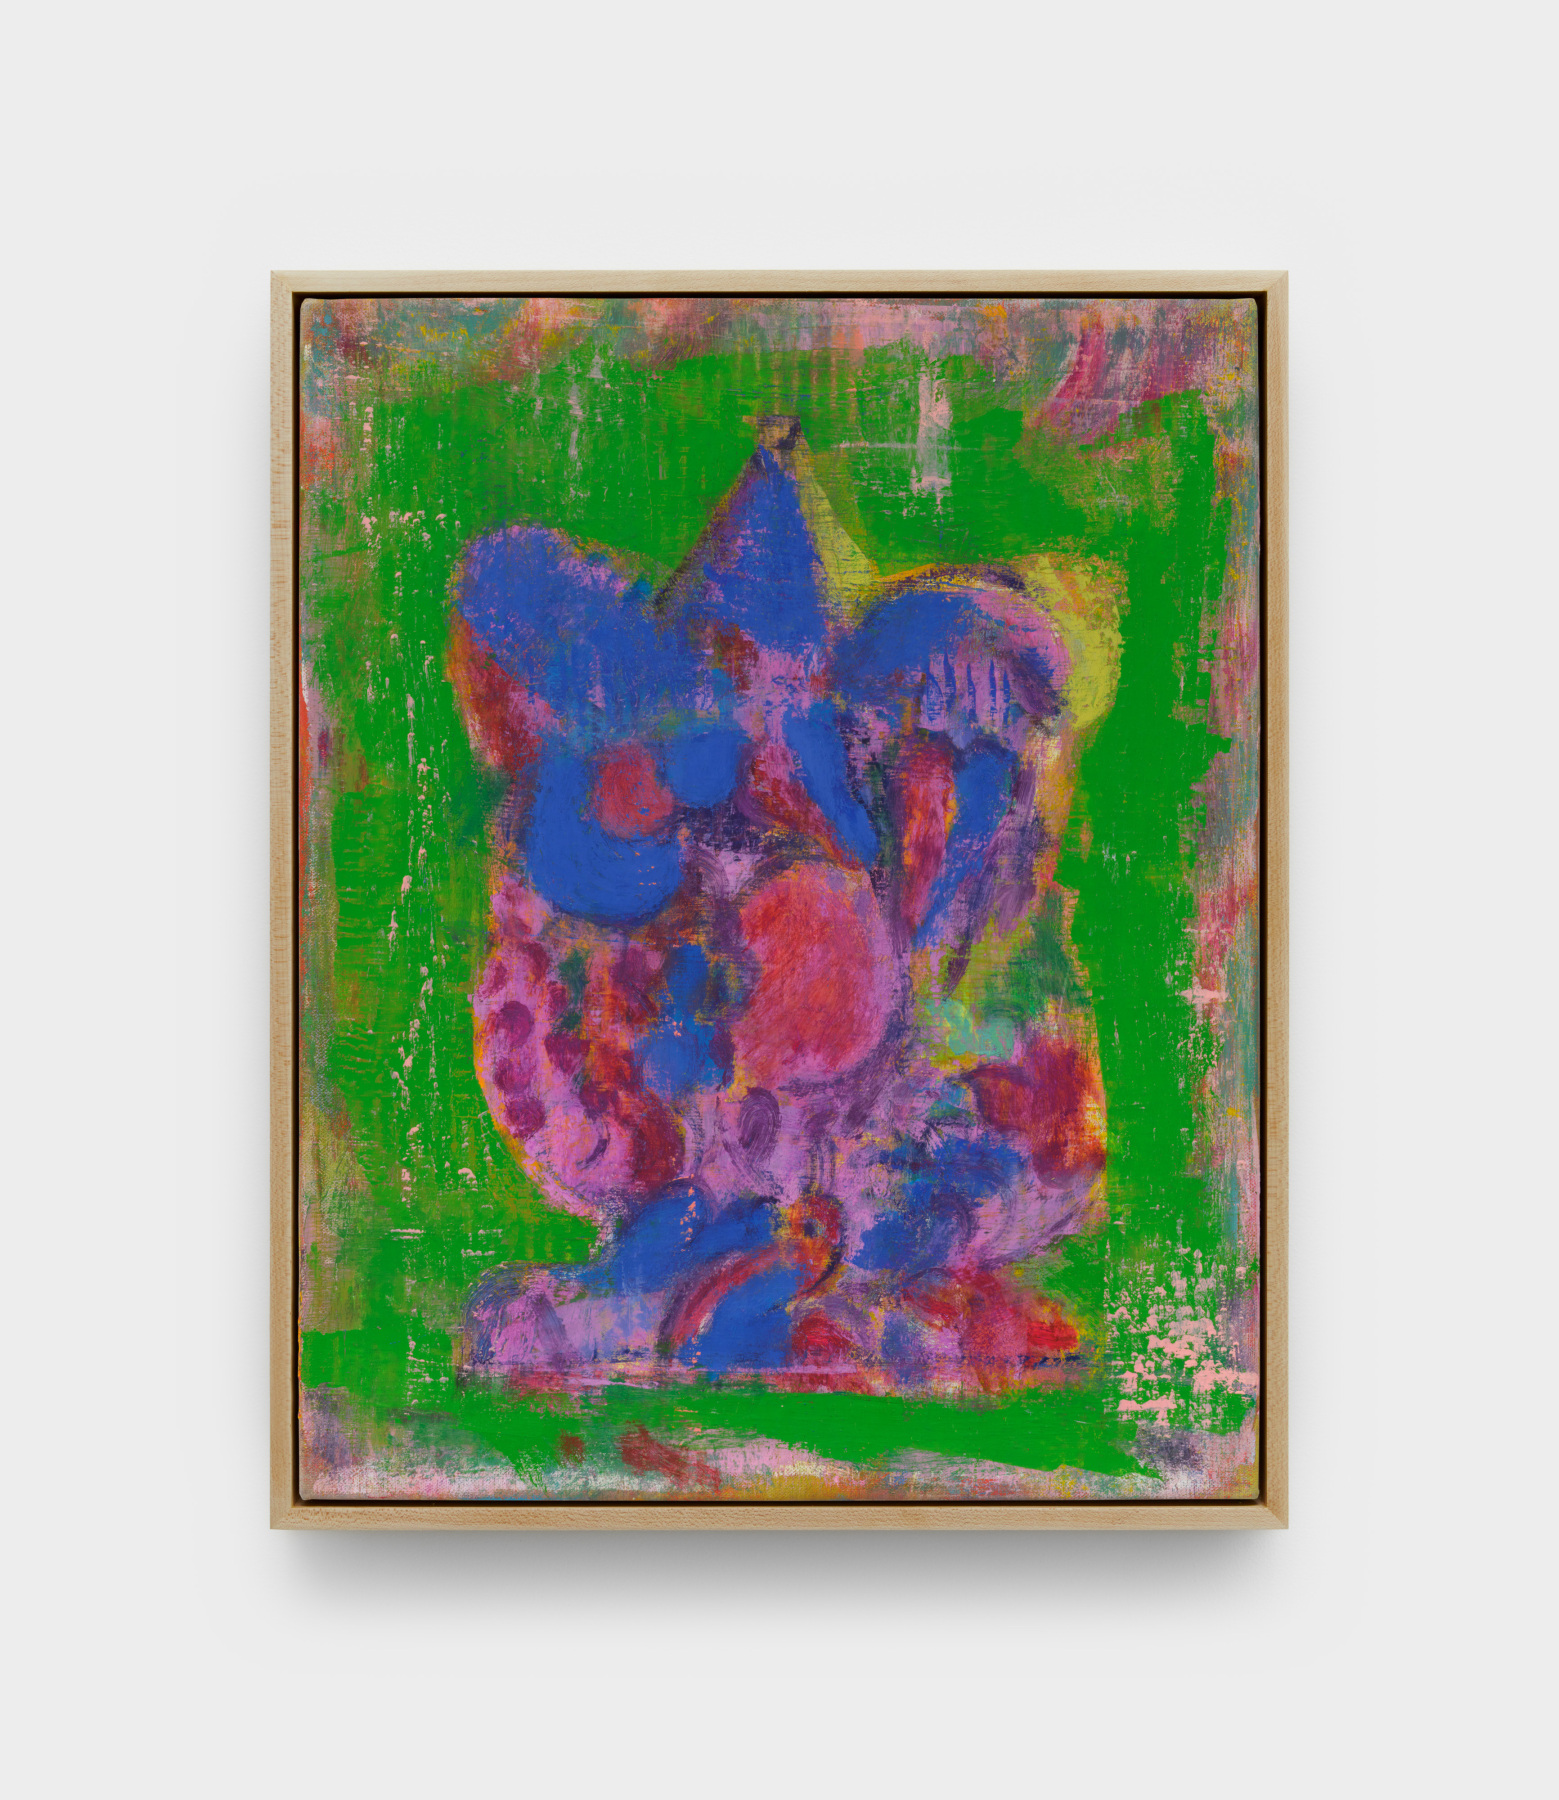 A painting by Michael Berryhill titled "Baton Rouge," which shows abstract blue, purple, and red shapes against a green background.